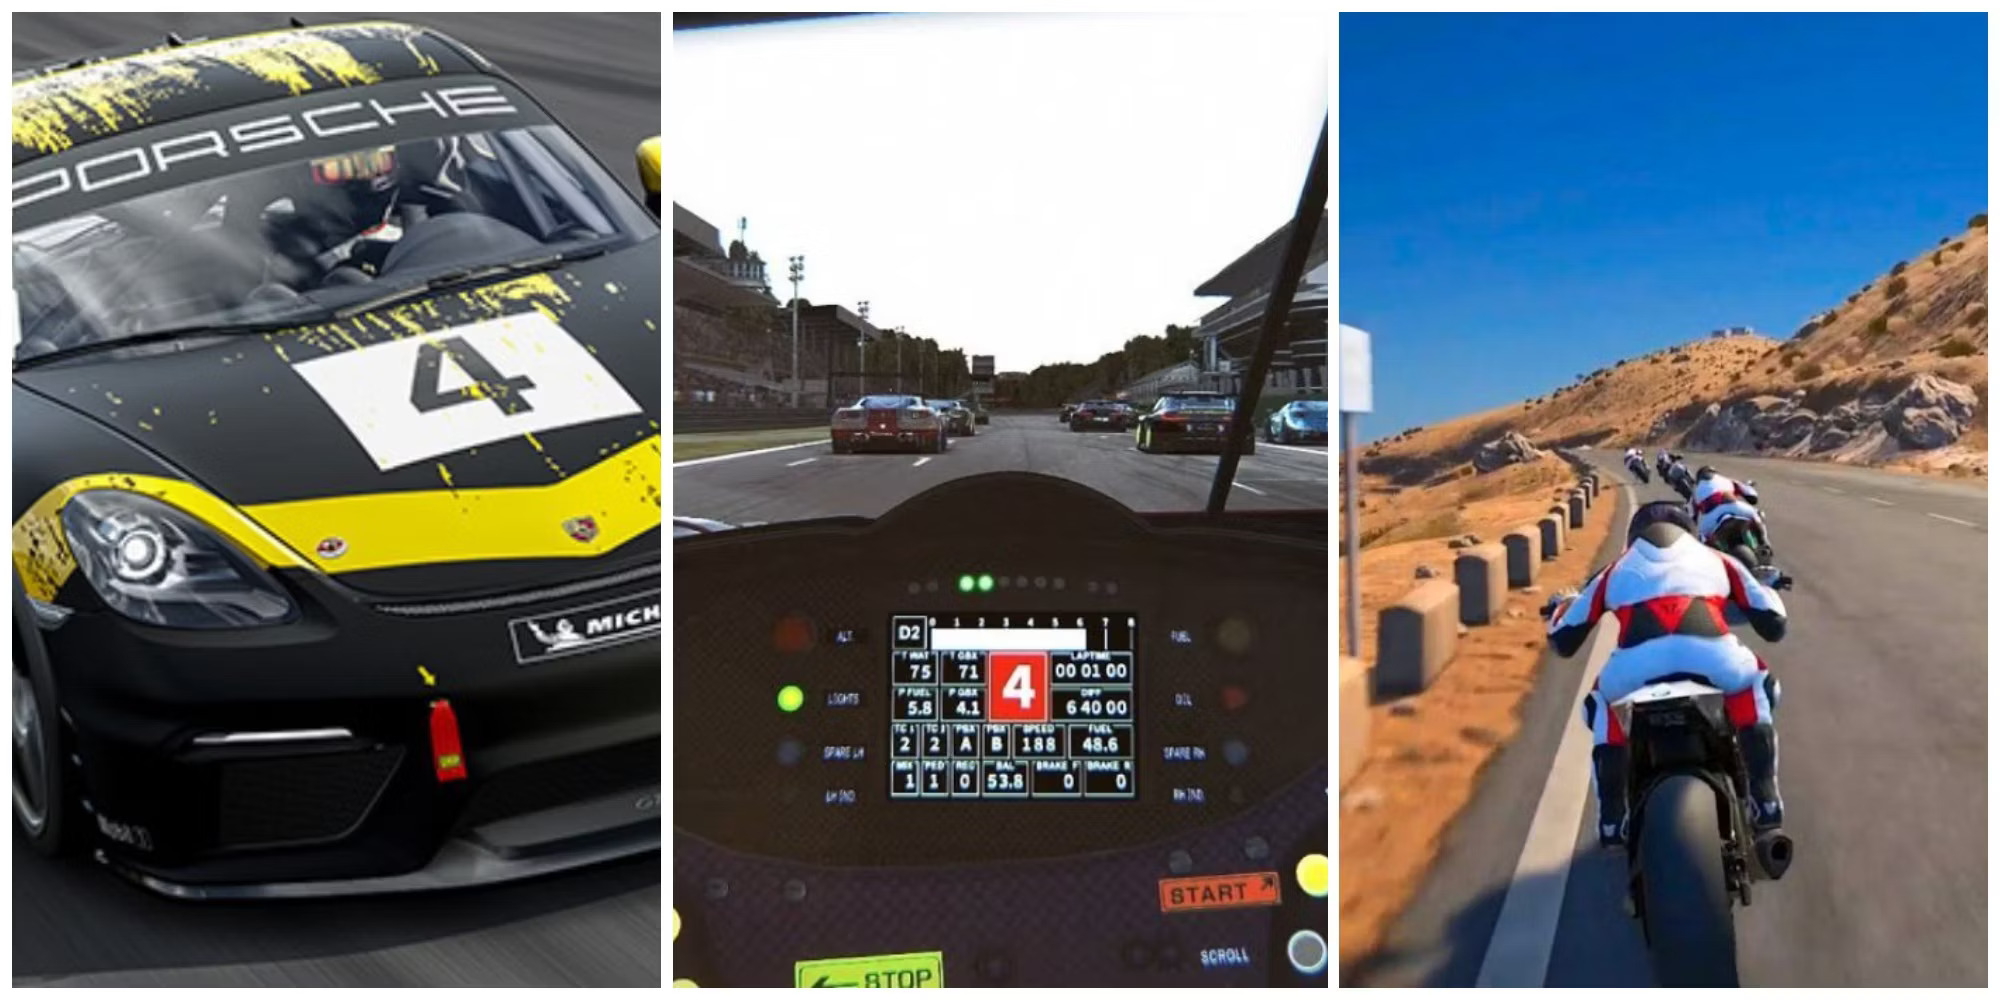 Racing Games With Realistic Physics And Mechanics - The Thrill Of The Race